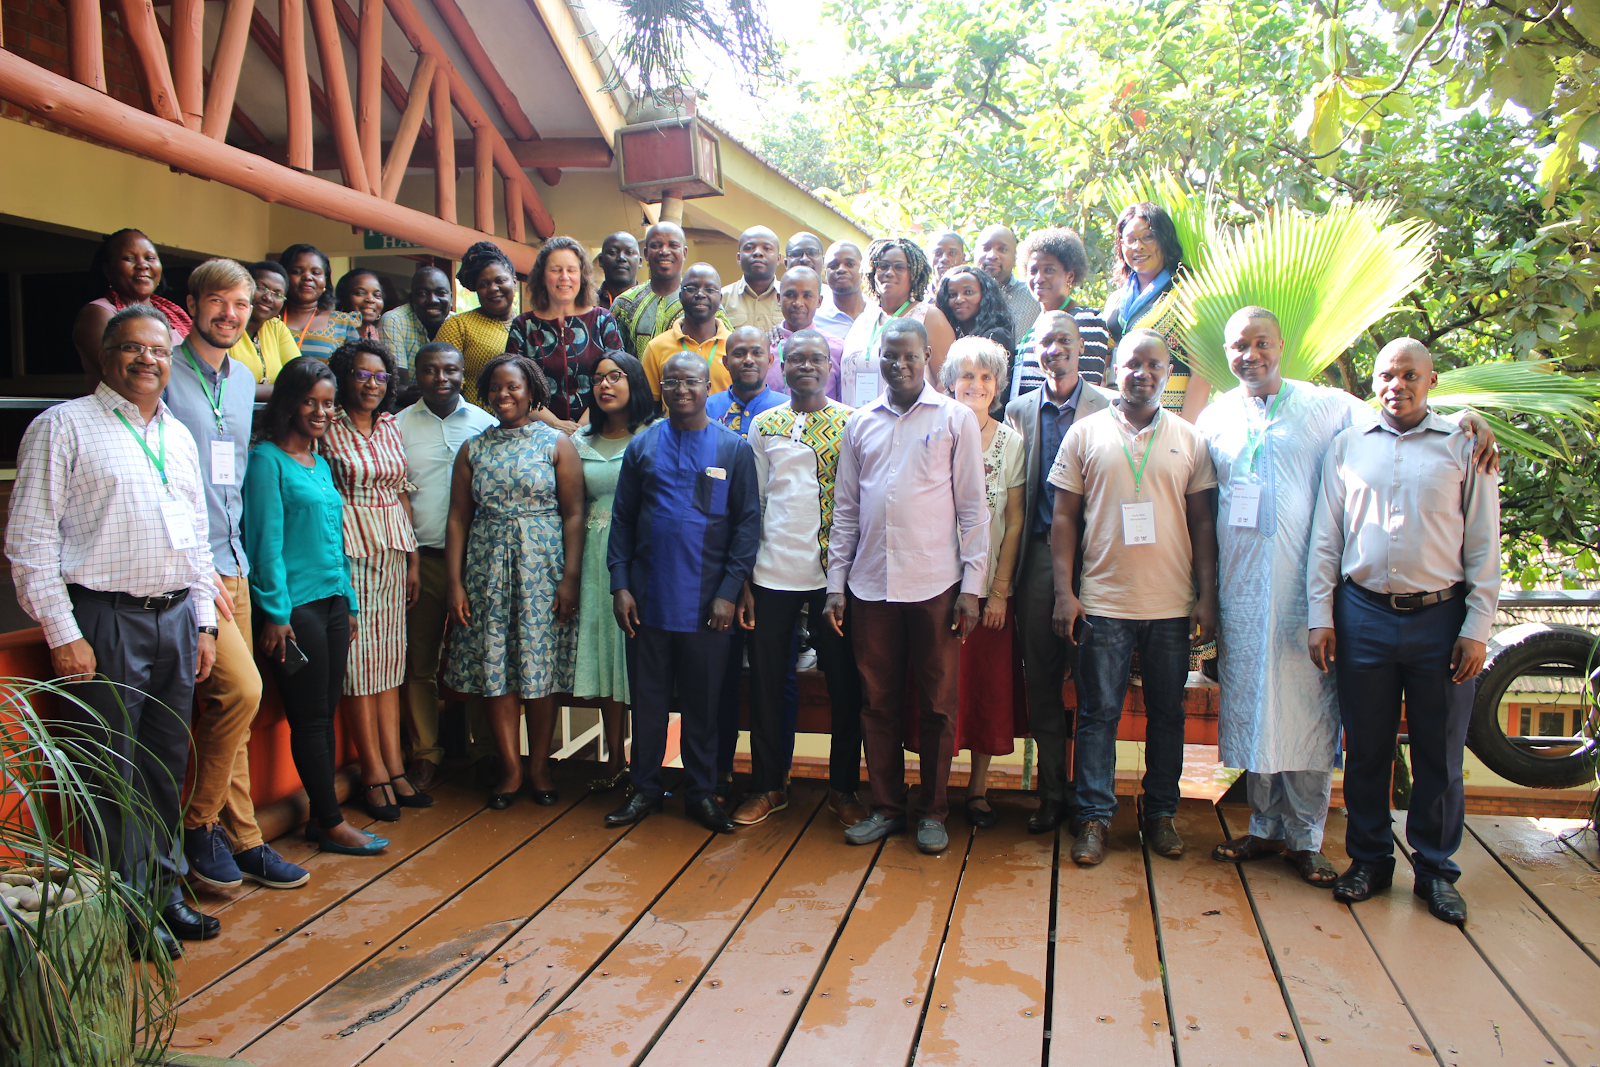 A group photo of participants and trainers, outside the training venue